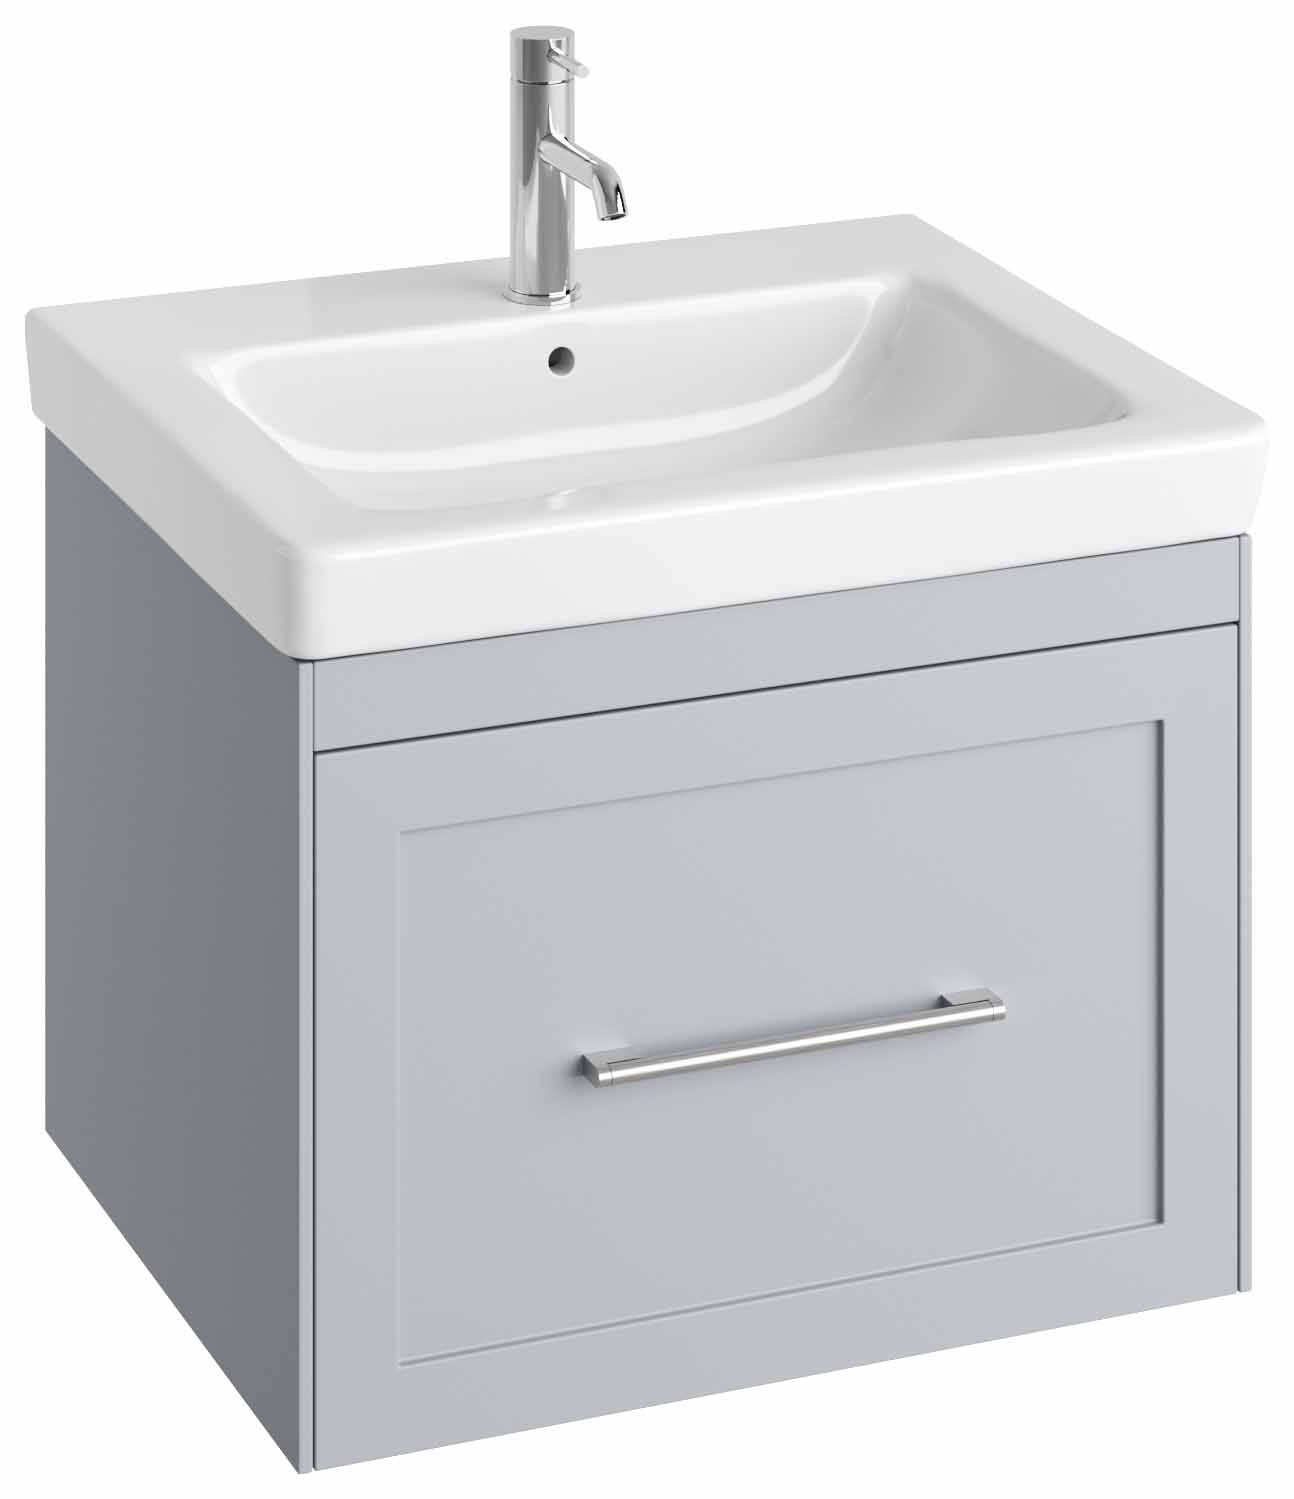 Image of Abacus Concept Stone Grey Shaker Wall Hung Vanity Unit & Basin - 600mm